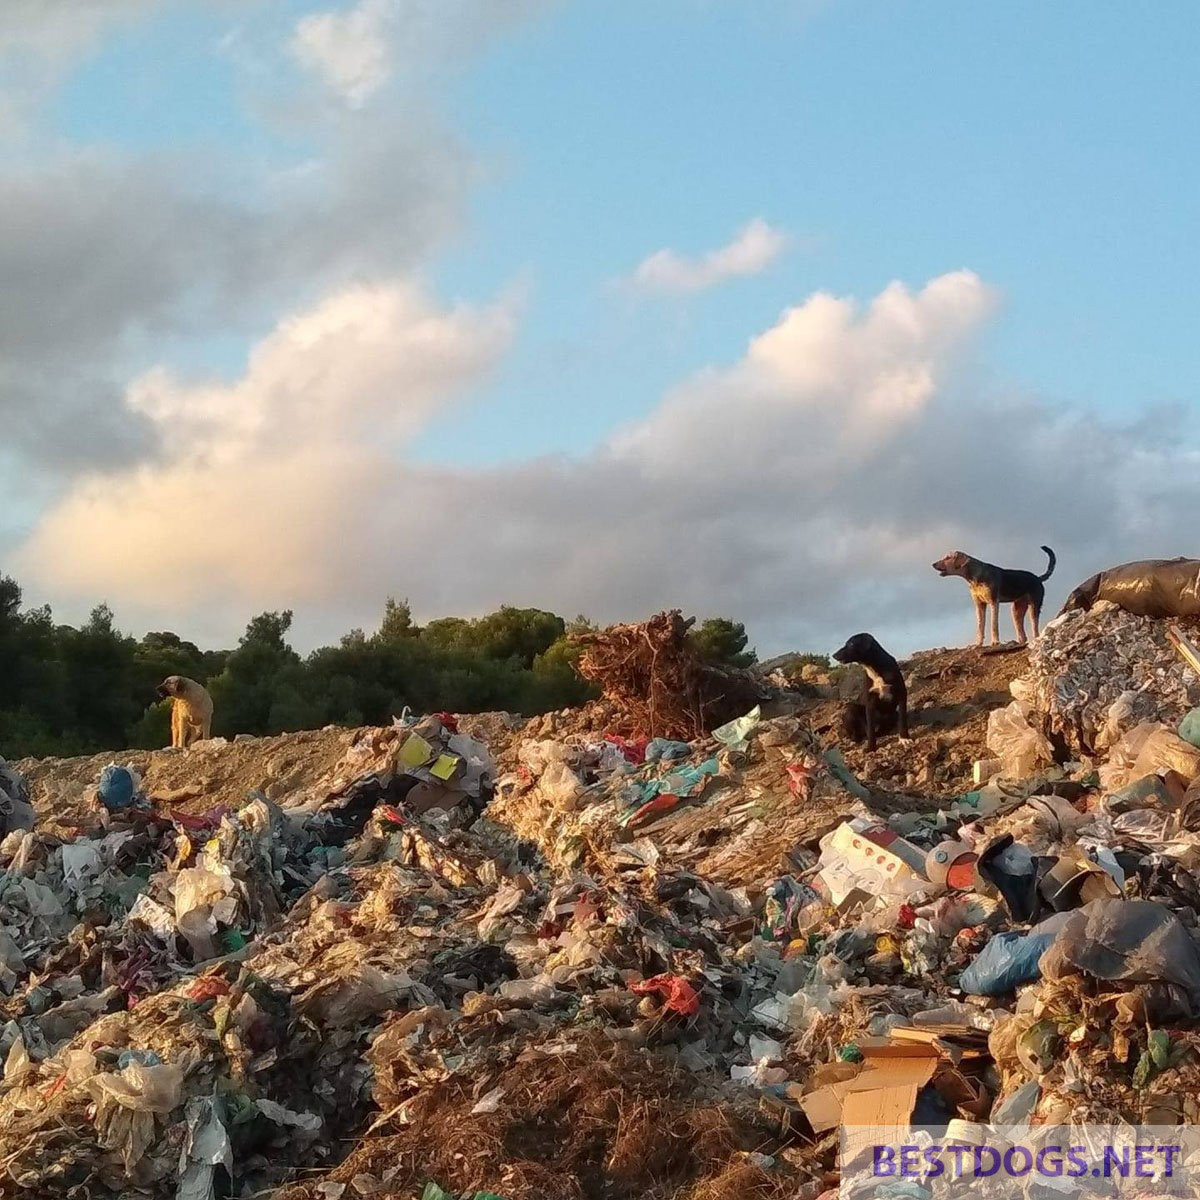 The Garbage Dogs